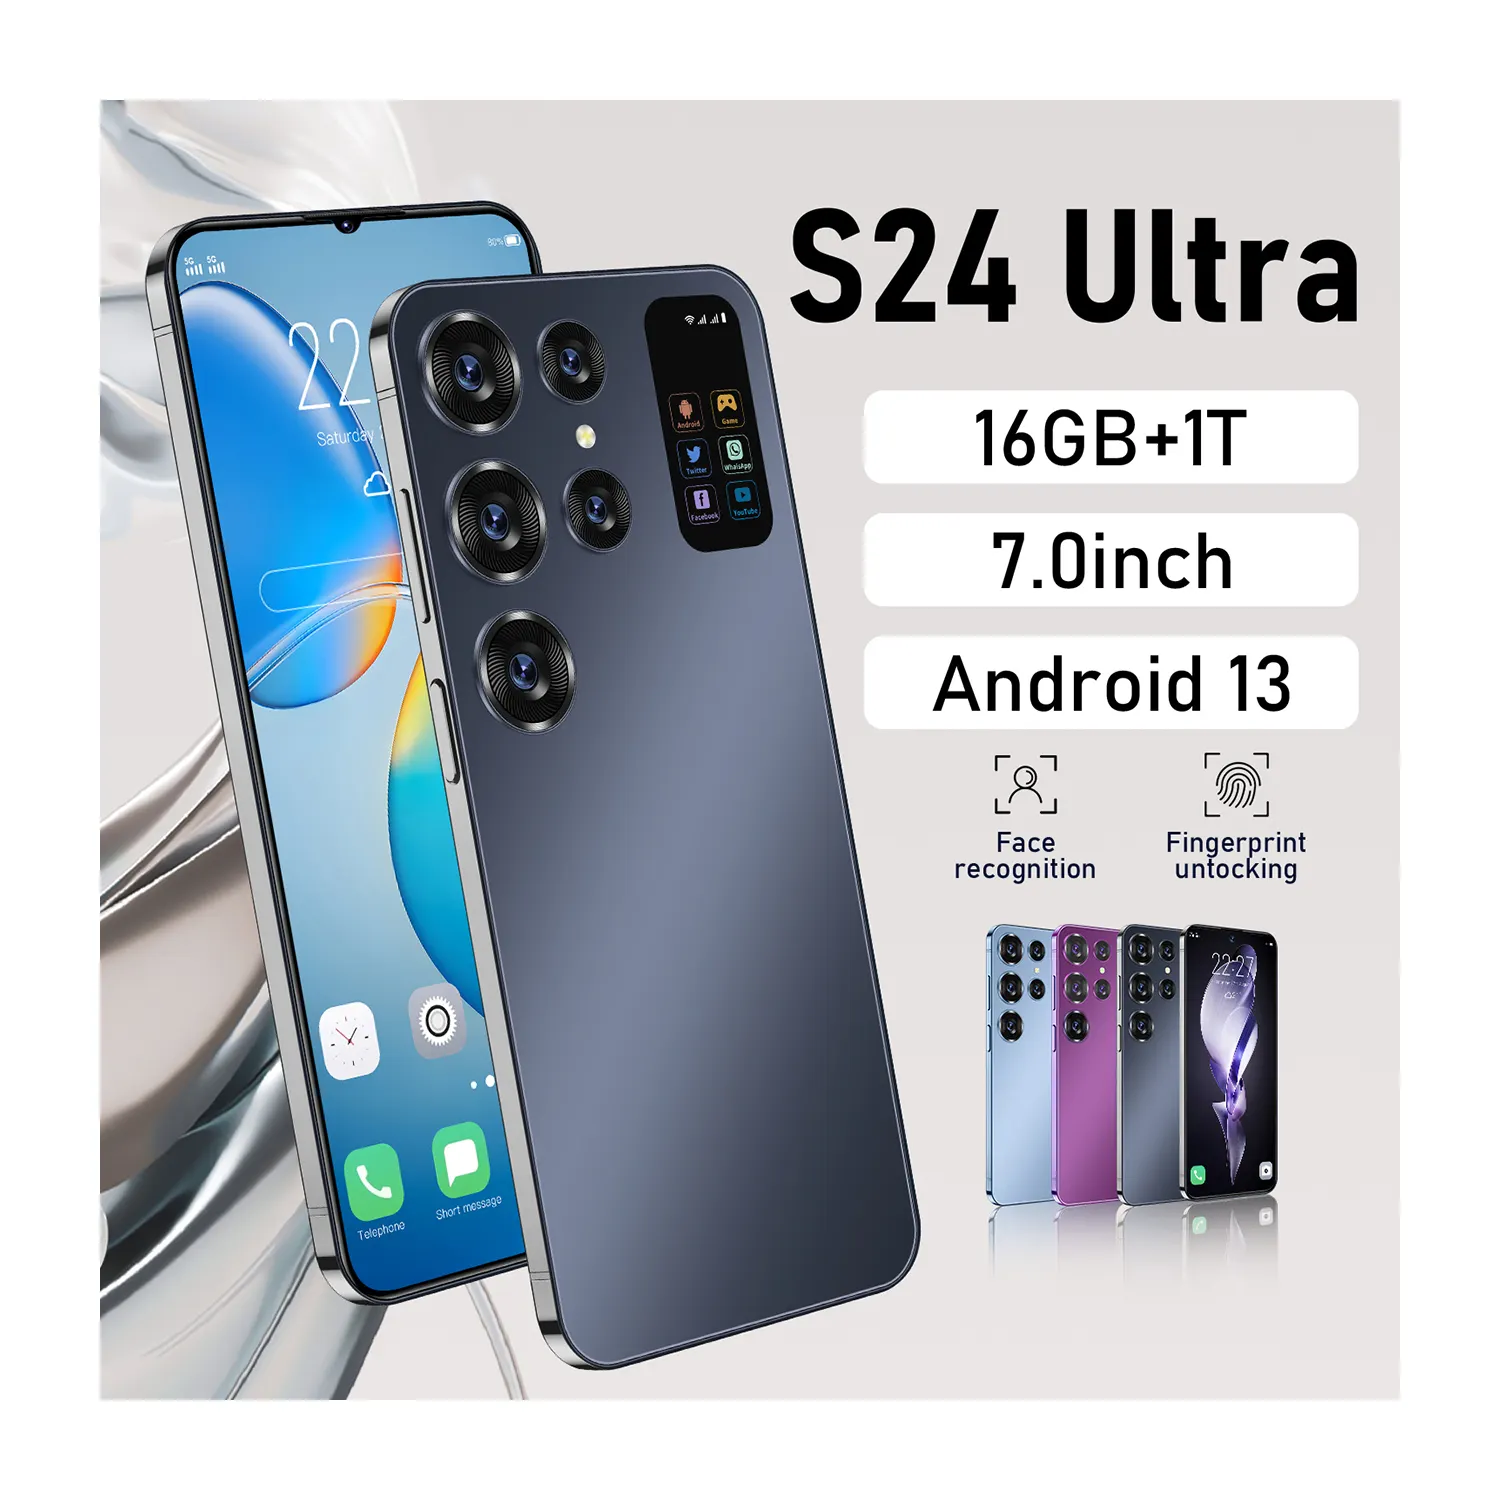 Imitate Smartphone S24 Ultra phone 0riginal 16GB+512GB Smartphone 7inch Unlocked dual card 5G Phones Android 13.0 Mobile phones